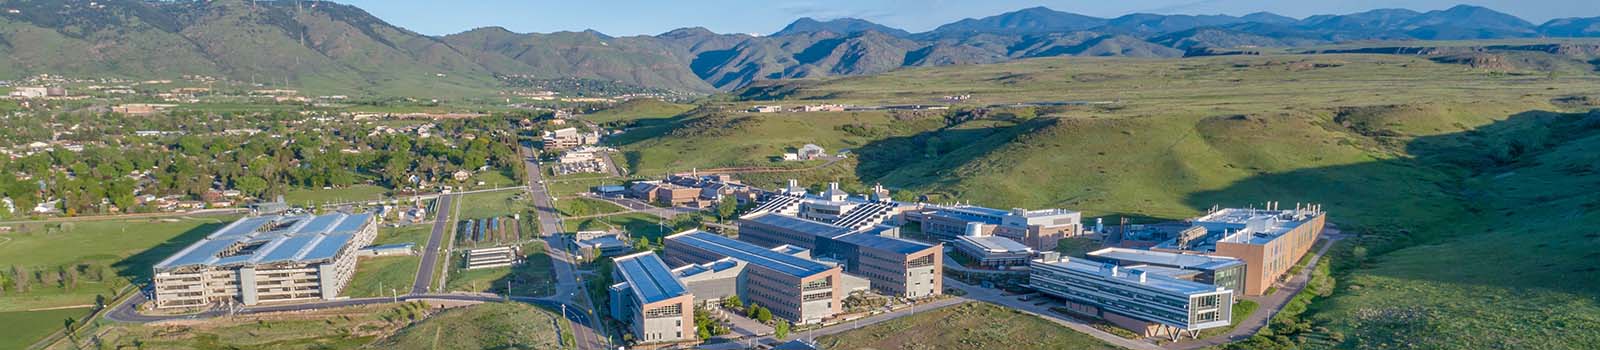 Aerial view of NREL's South Table Mountain campus